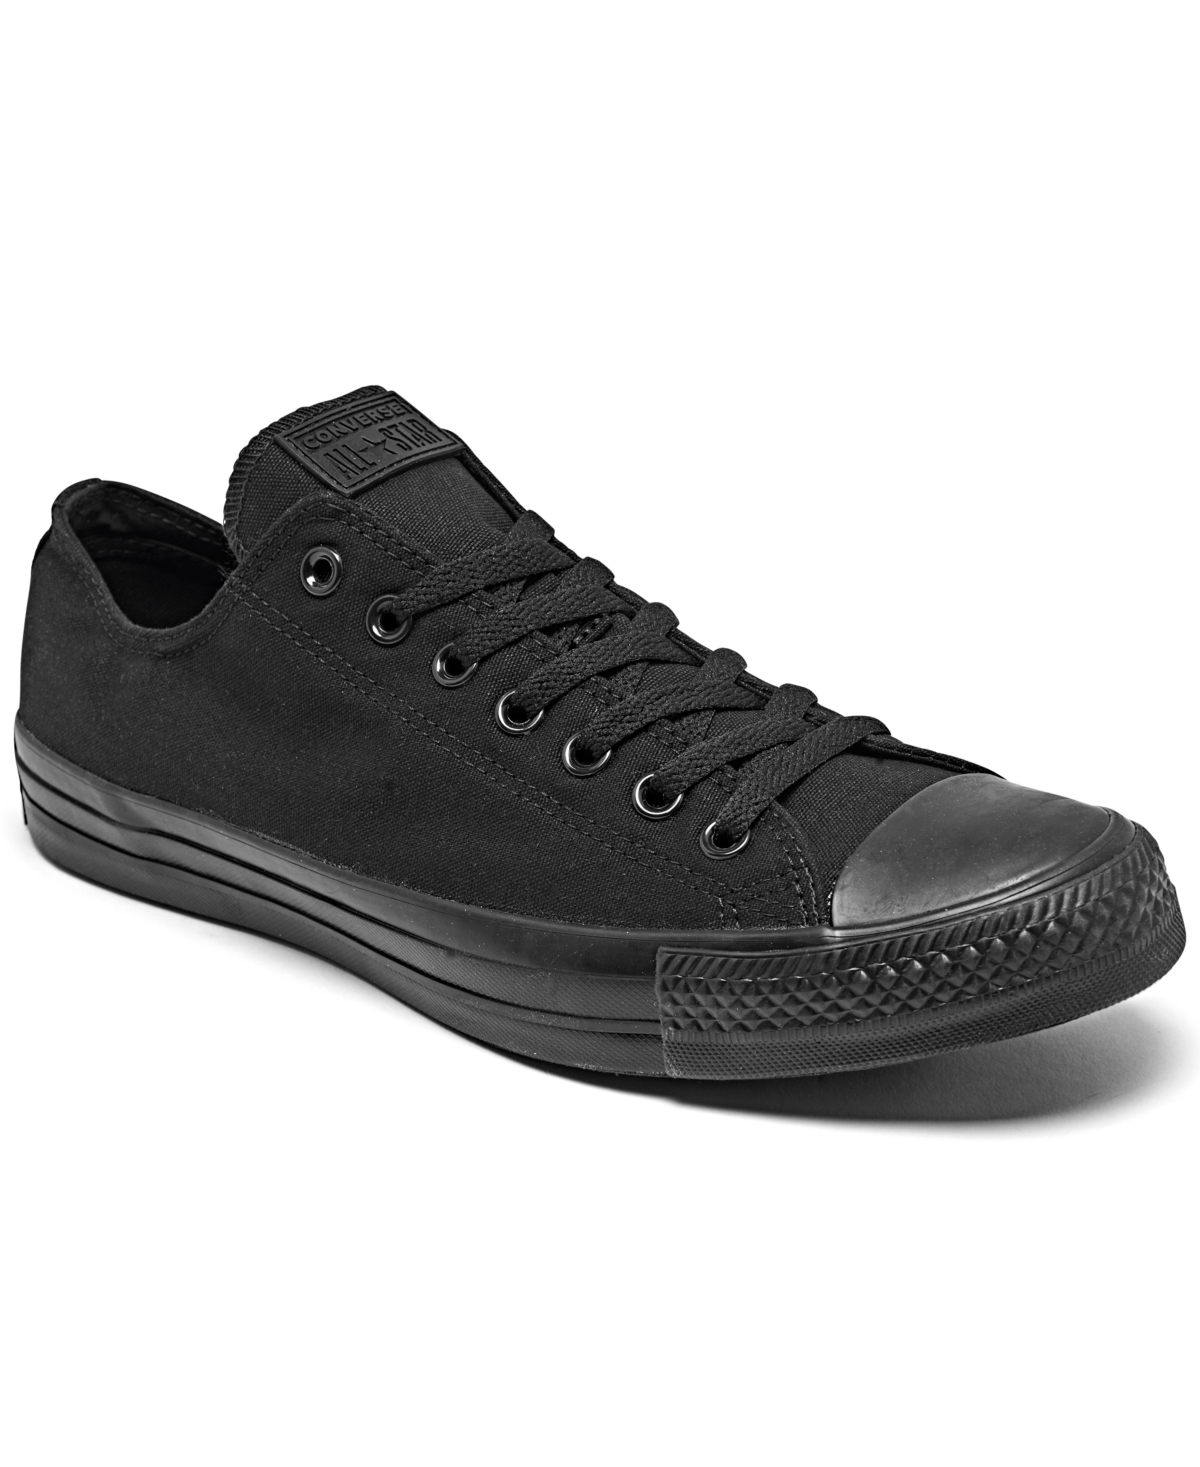 UPC 022859737371 product image for Converse Men's Chuck Taylor Low Top Sneakers from Finish Line | upcitemdb.com